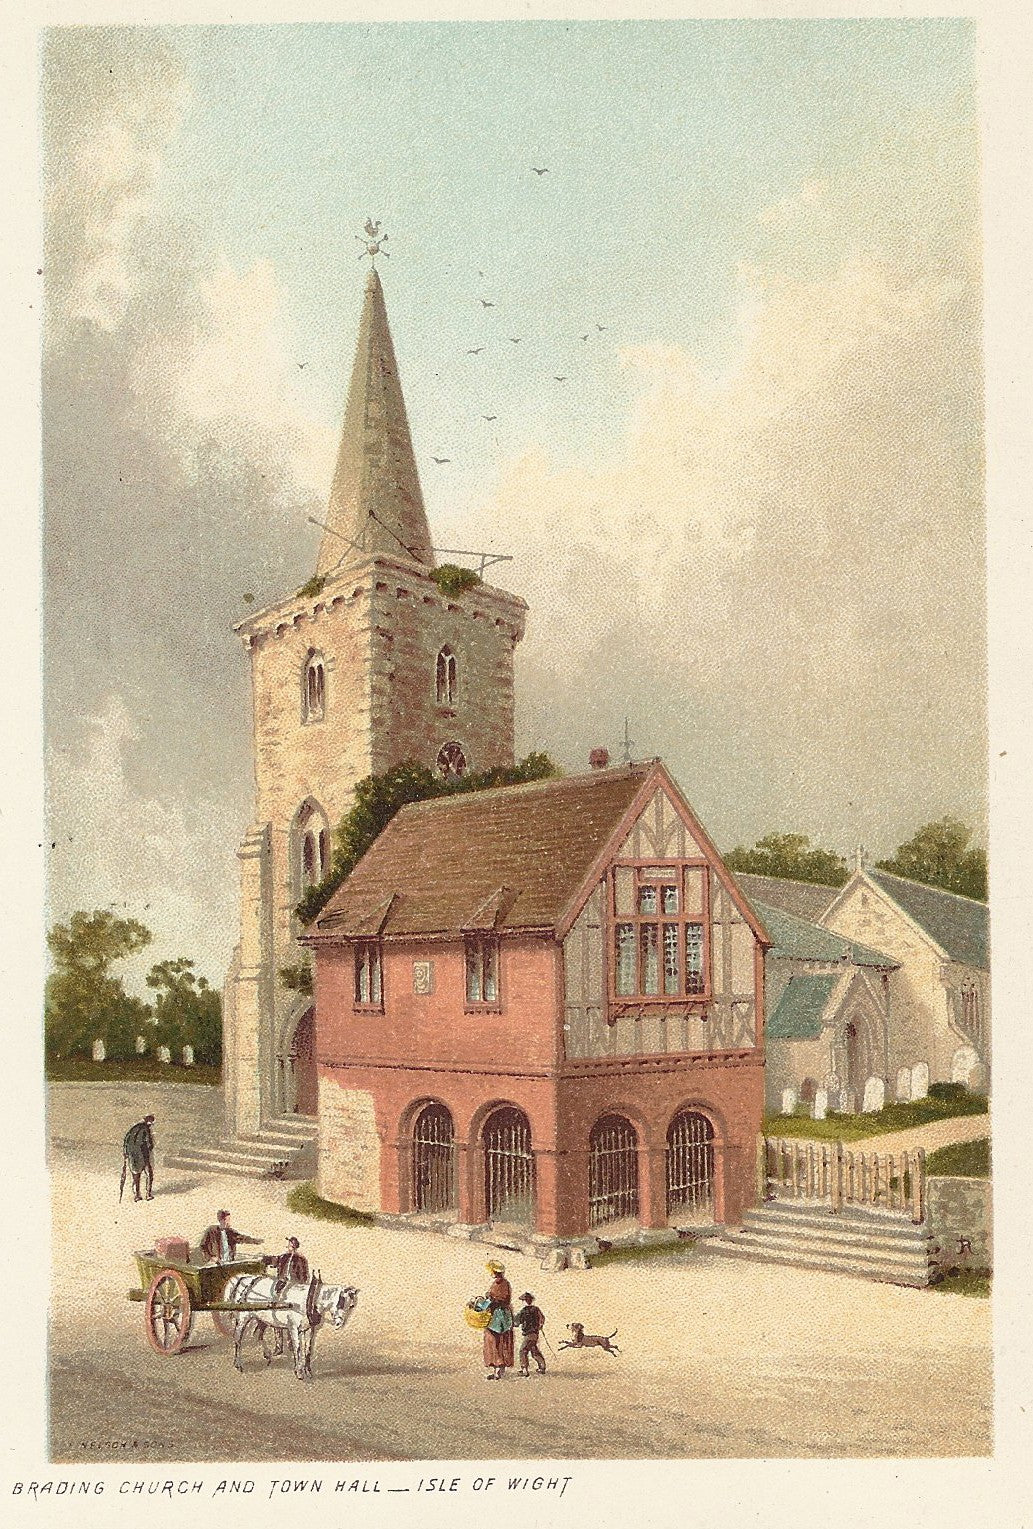 Brading Church & Town Hall Isle of Wight antique print 1892